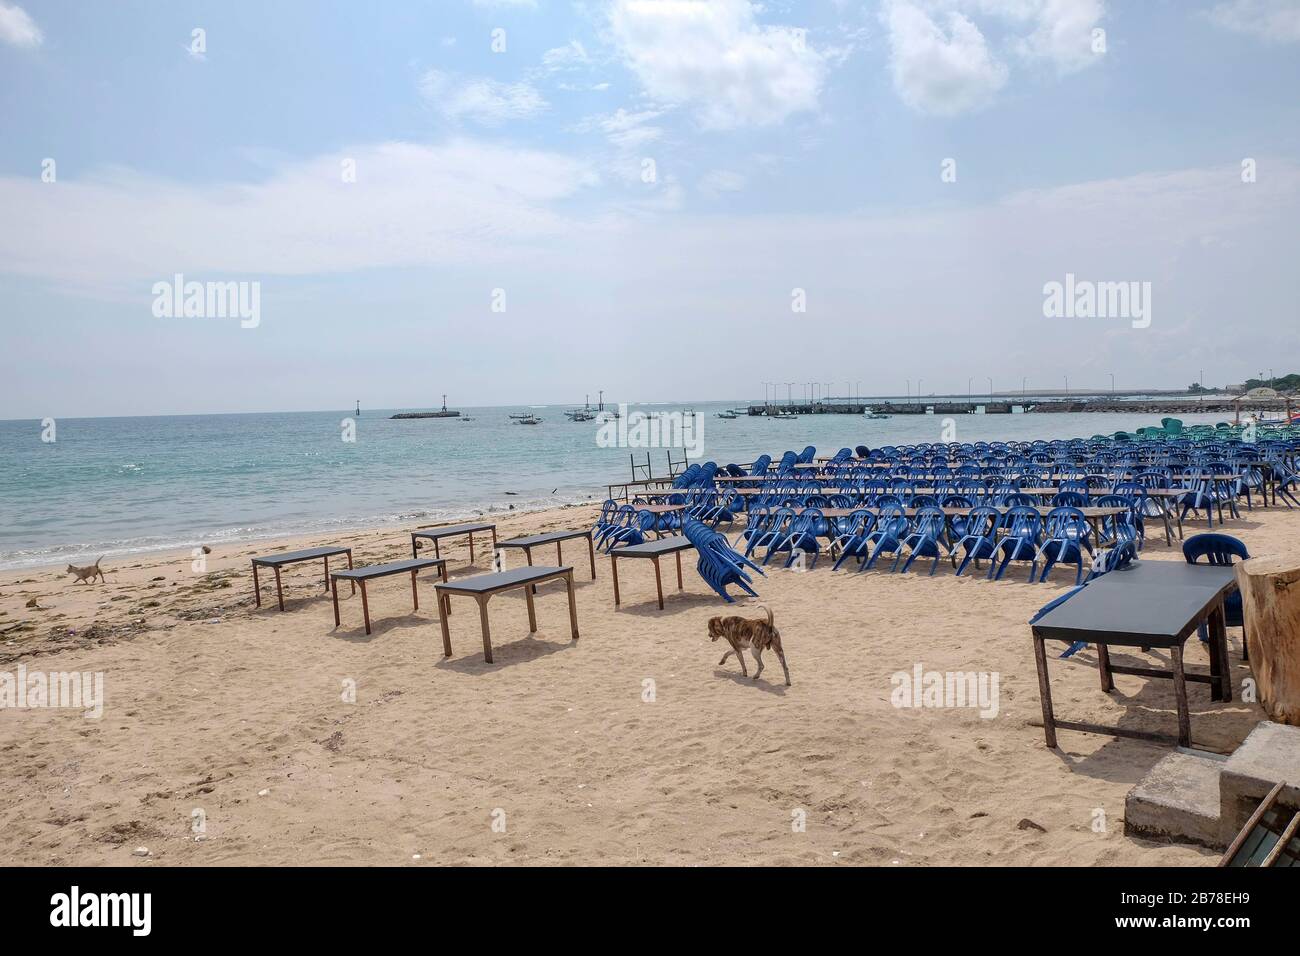 Bali, Indonesia. 14th Mar, 2020. Photo shows an empty seafood